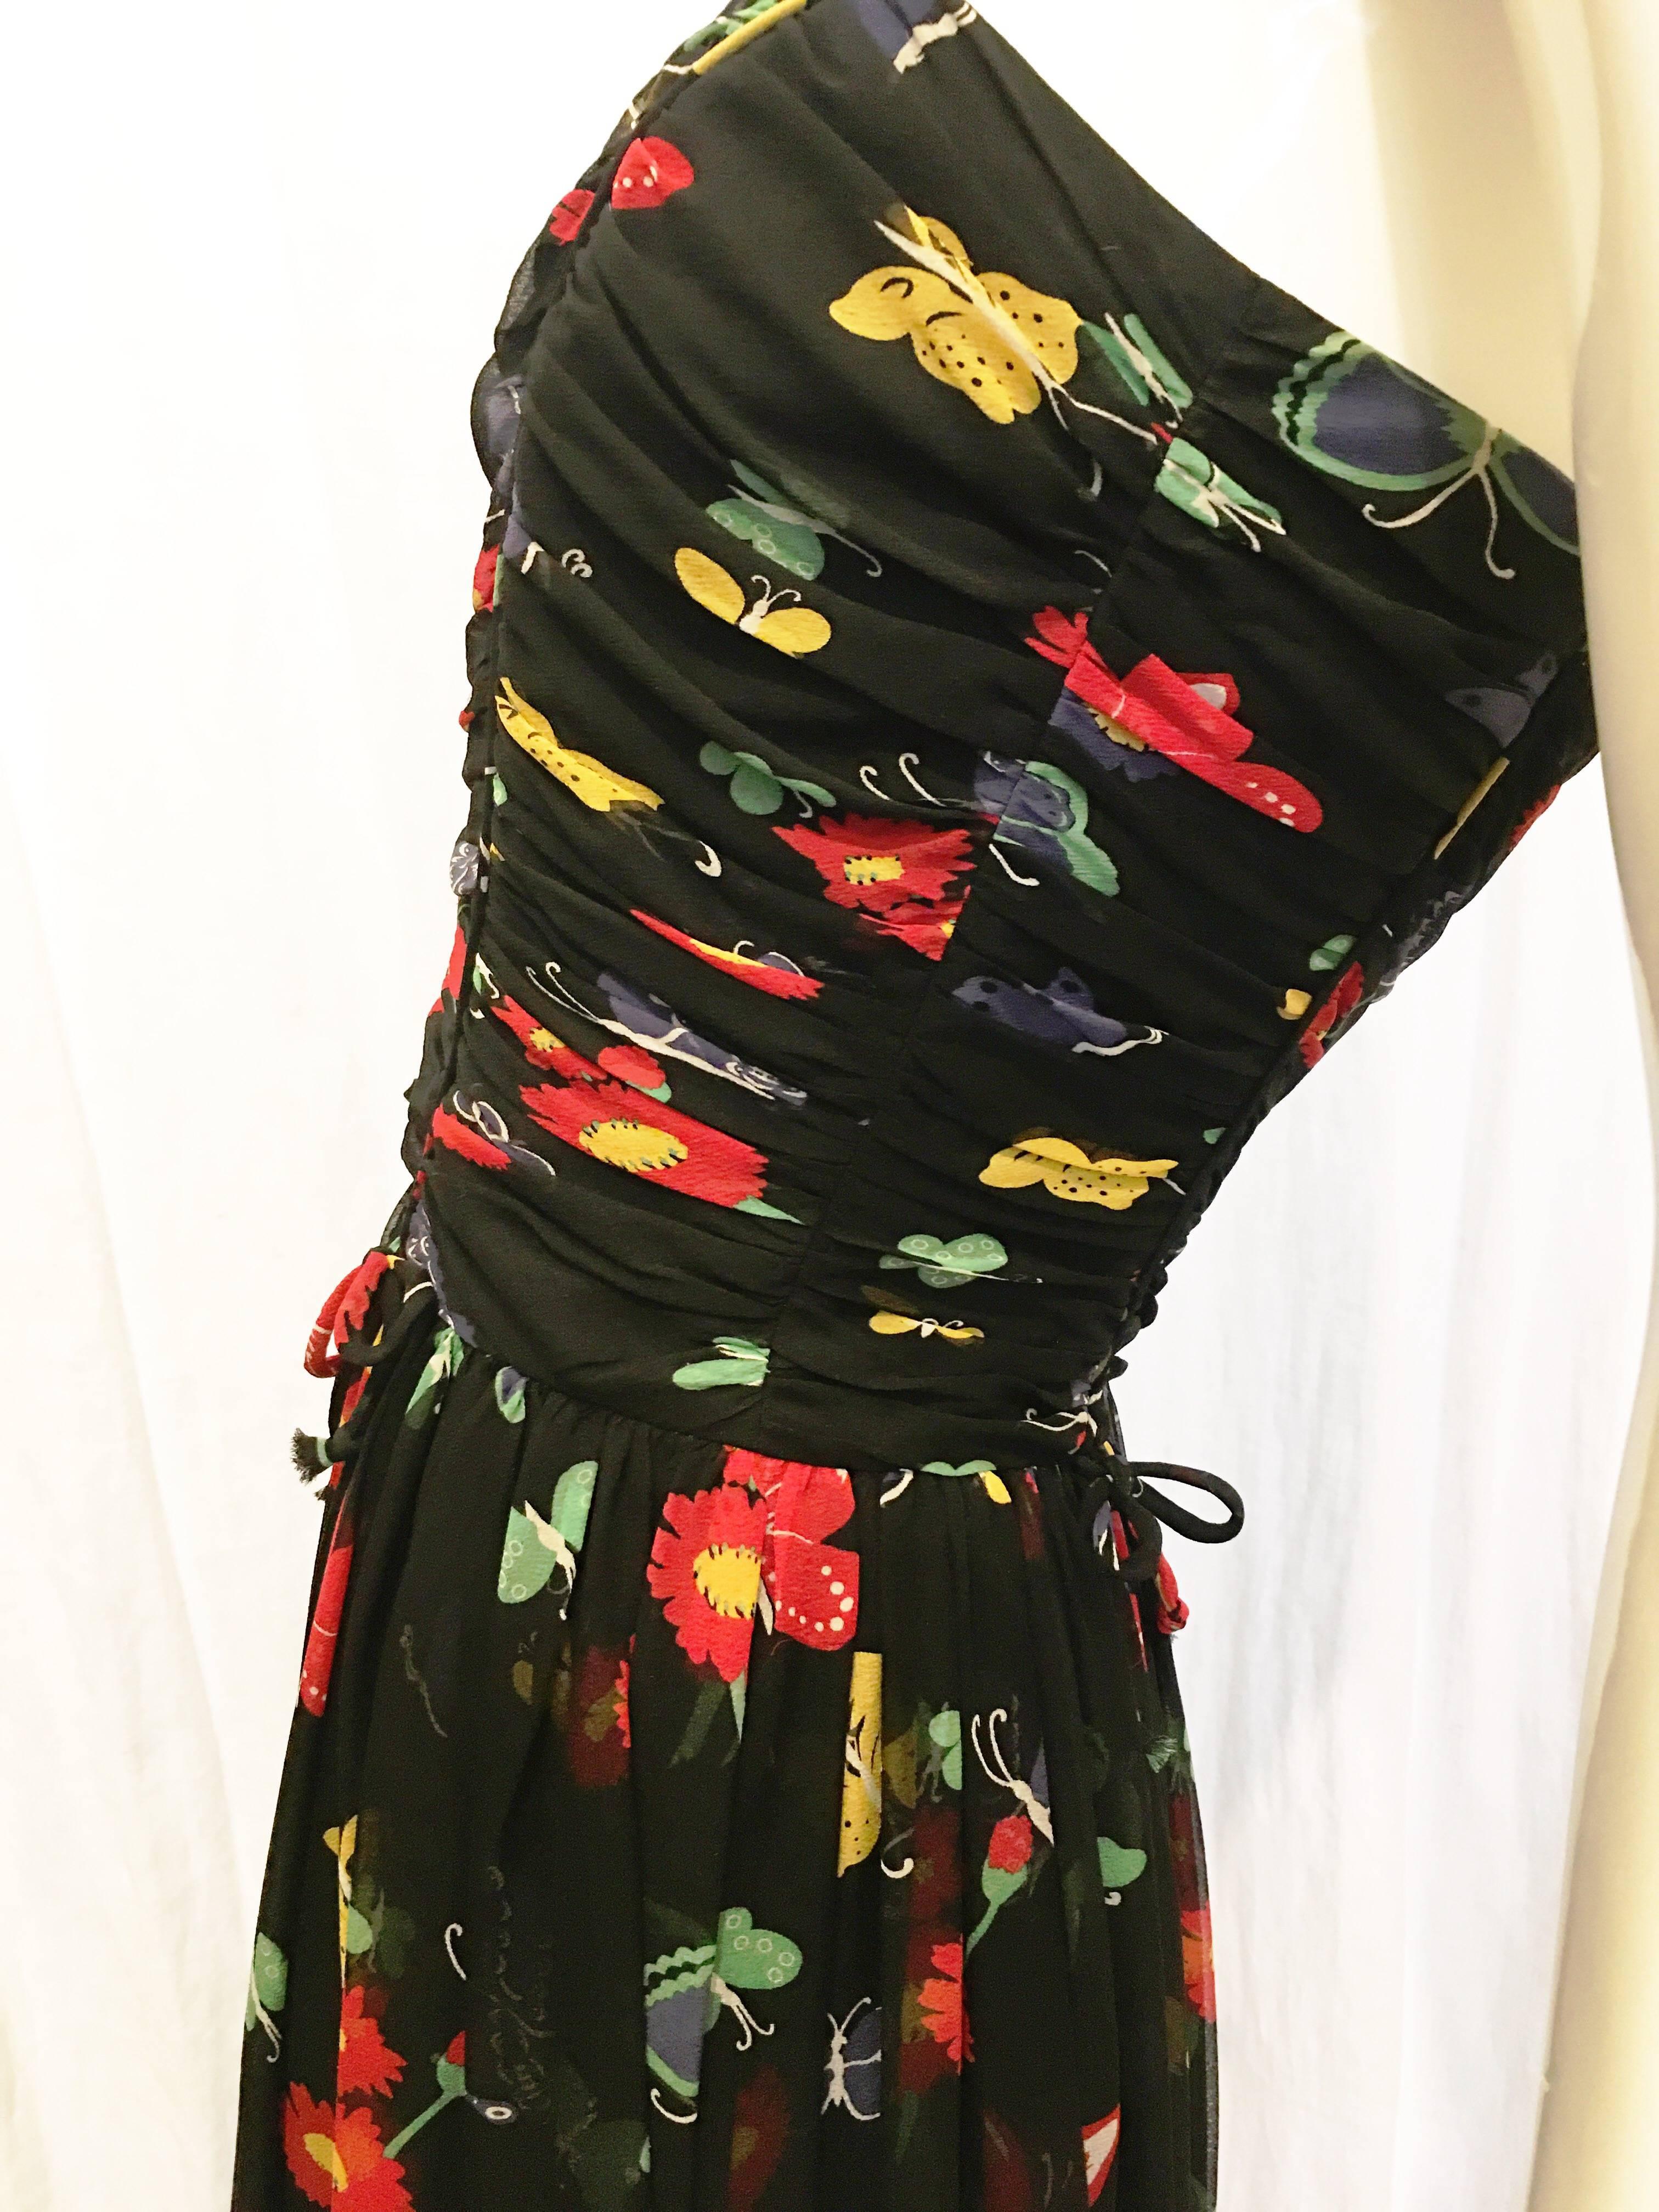 Anna Sui for Anthropologie Black Floral Flowy Dress  In Excellent Condition For Sale In Brooklyn, NY